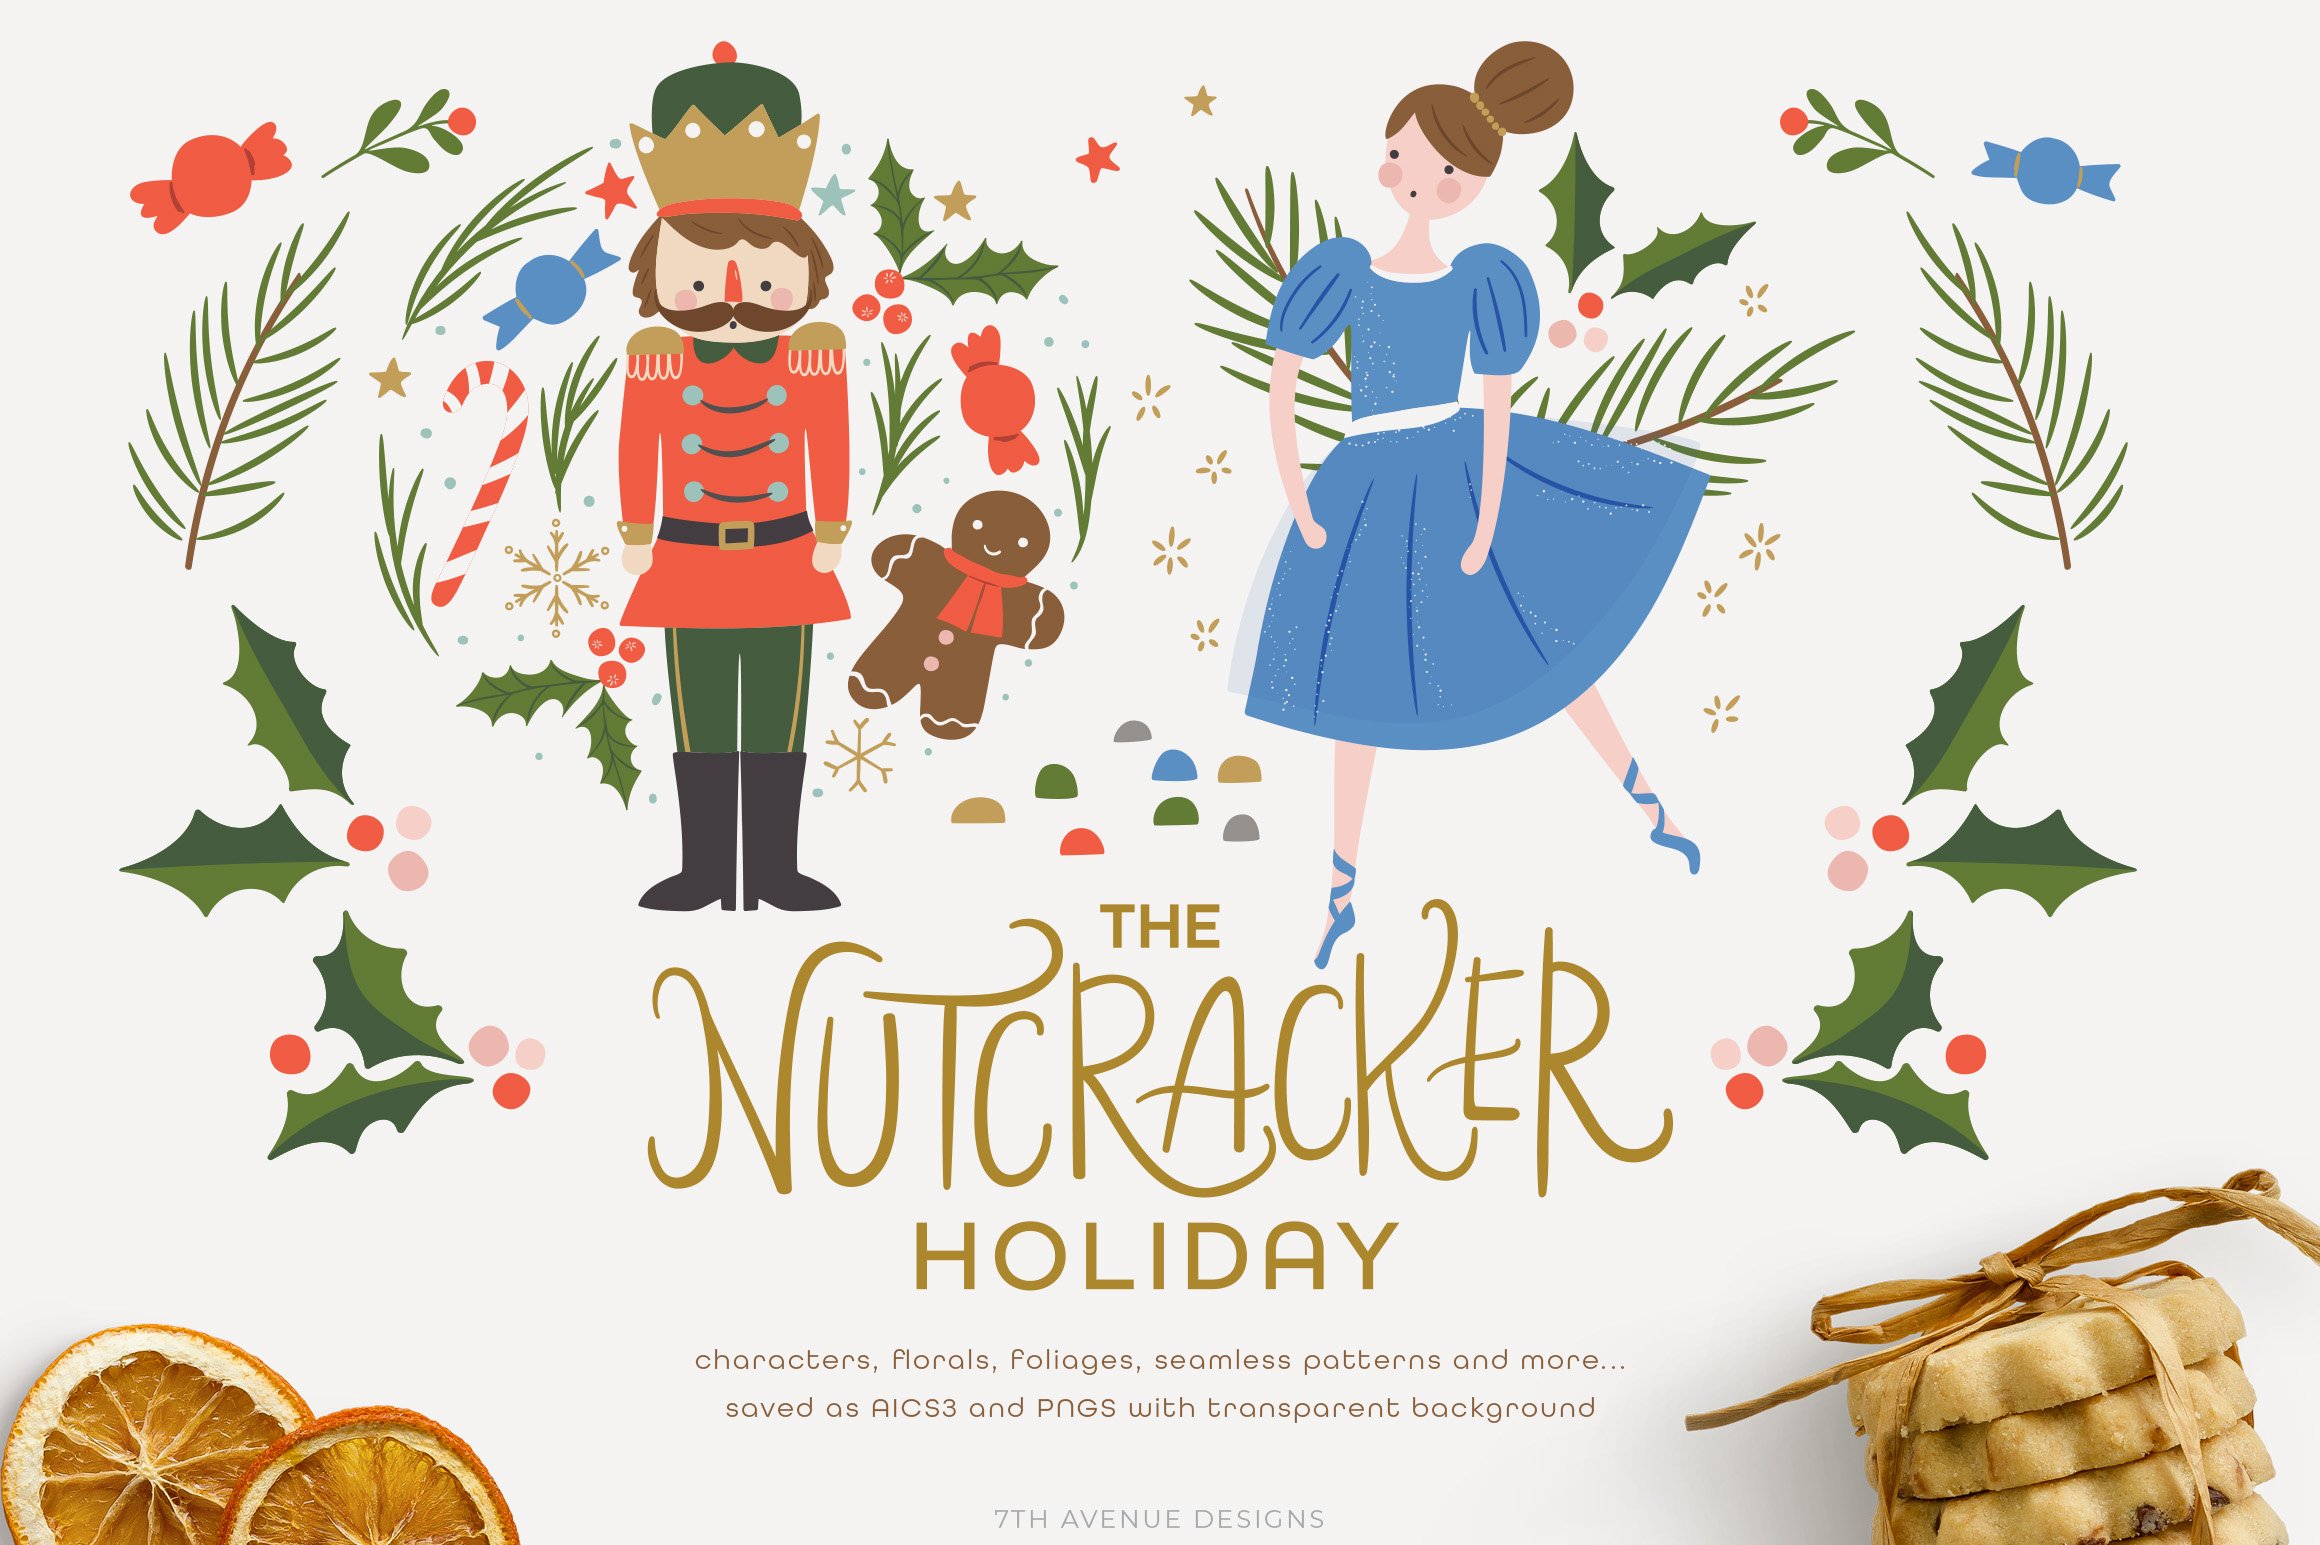 The Nutcracker Holiday cover image.